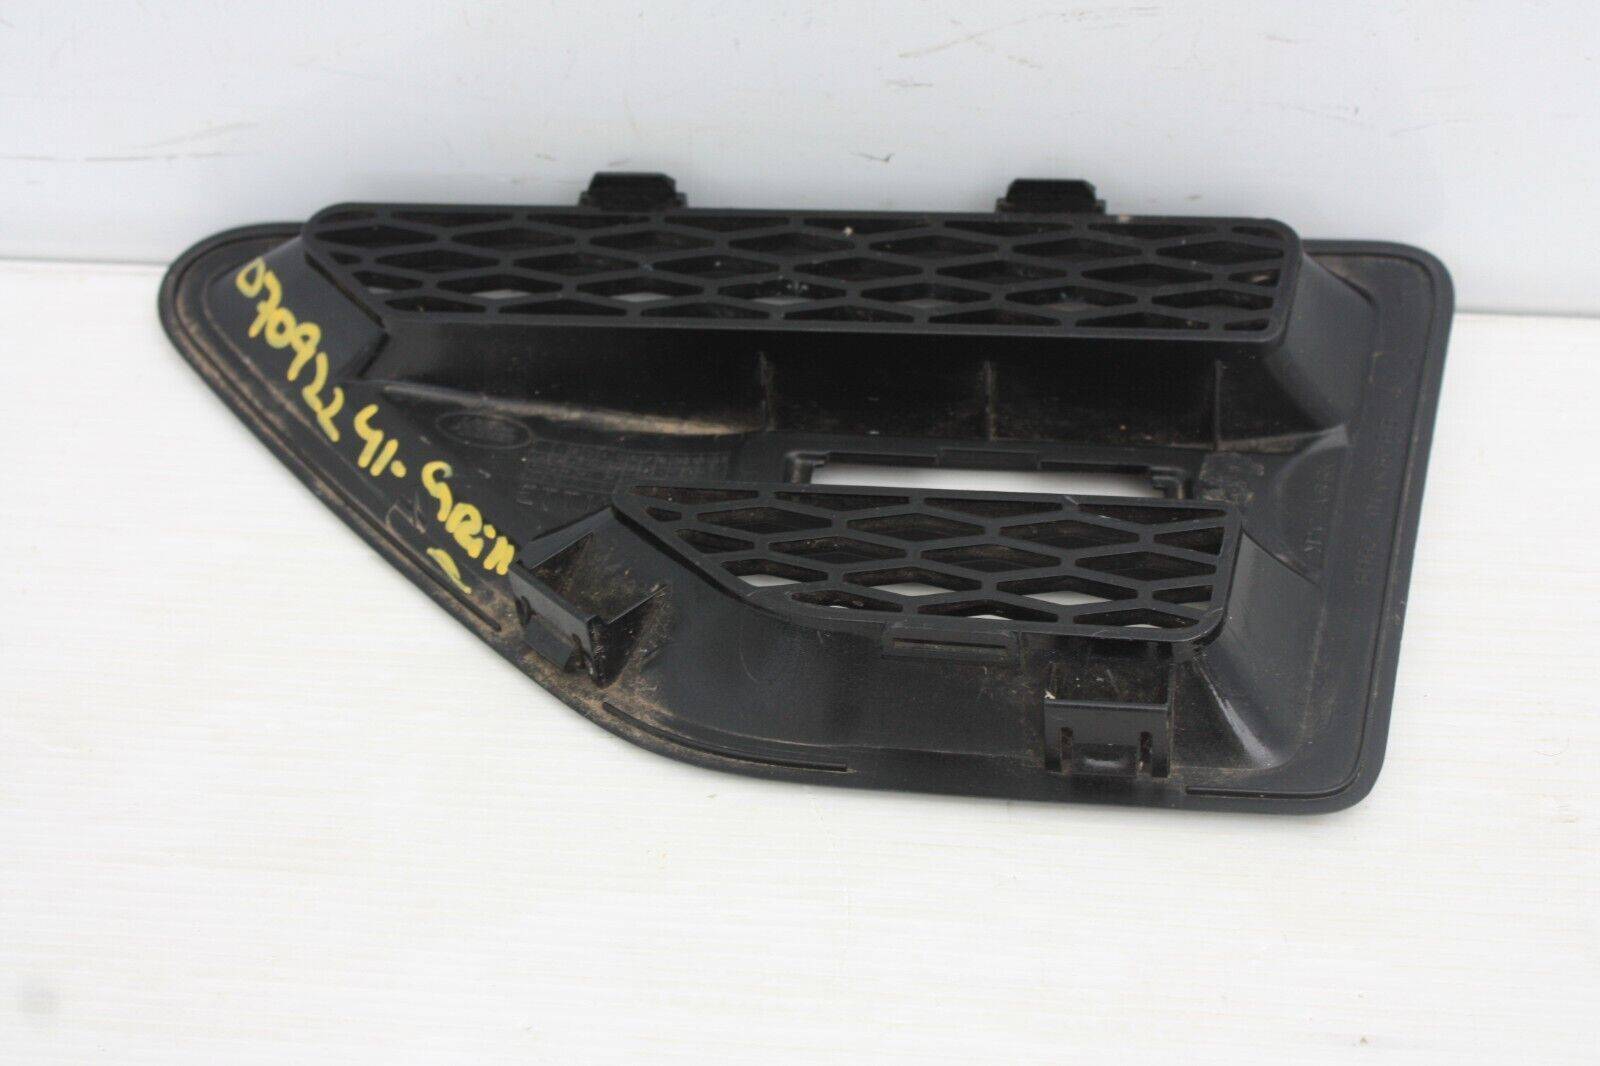 Land-Rover-Freelander-Front-Right-Side-Wing-Grill-2007-to-2015-6H52-014K80-BB-176267107753-11